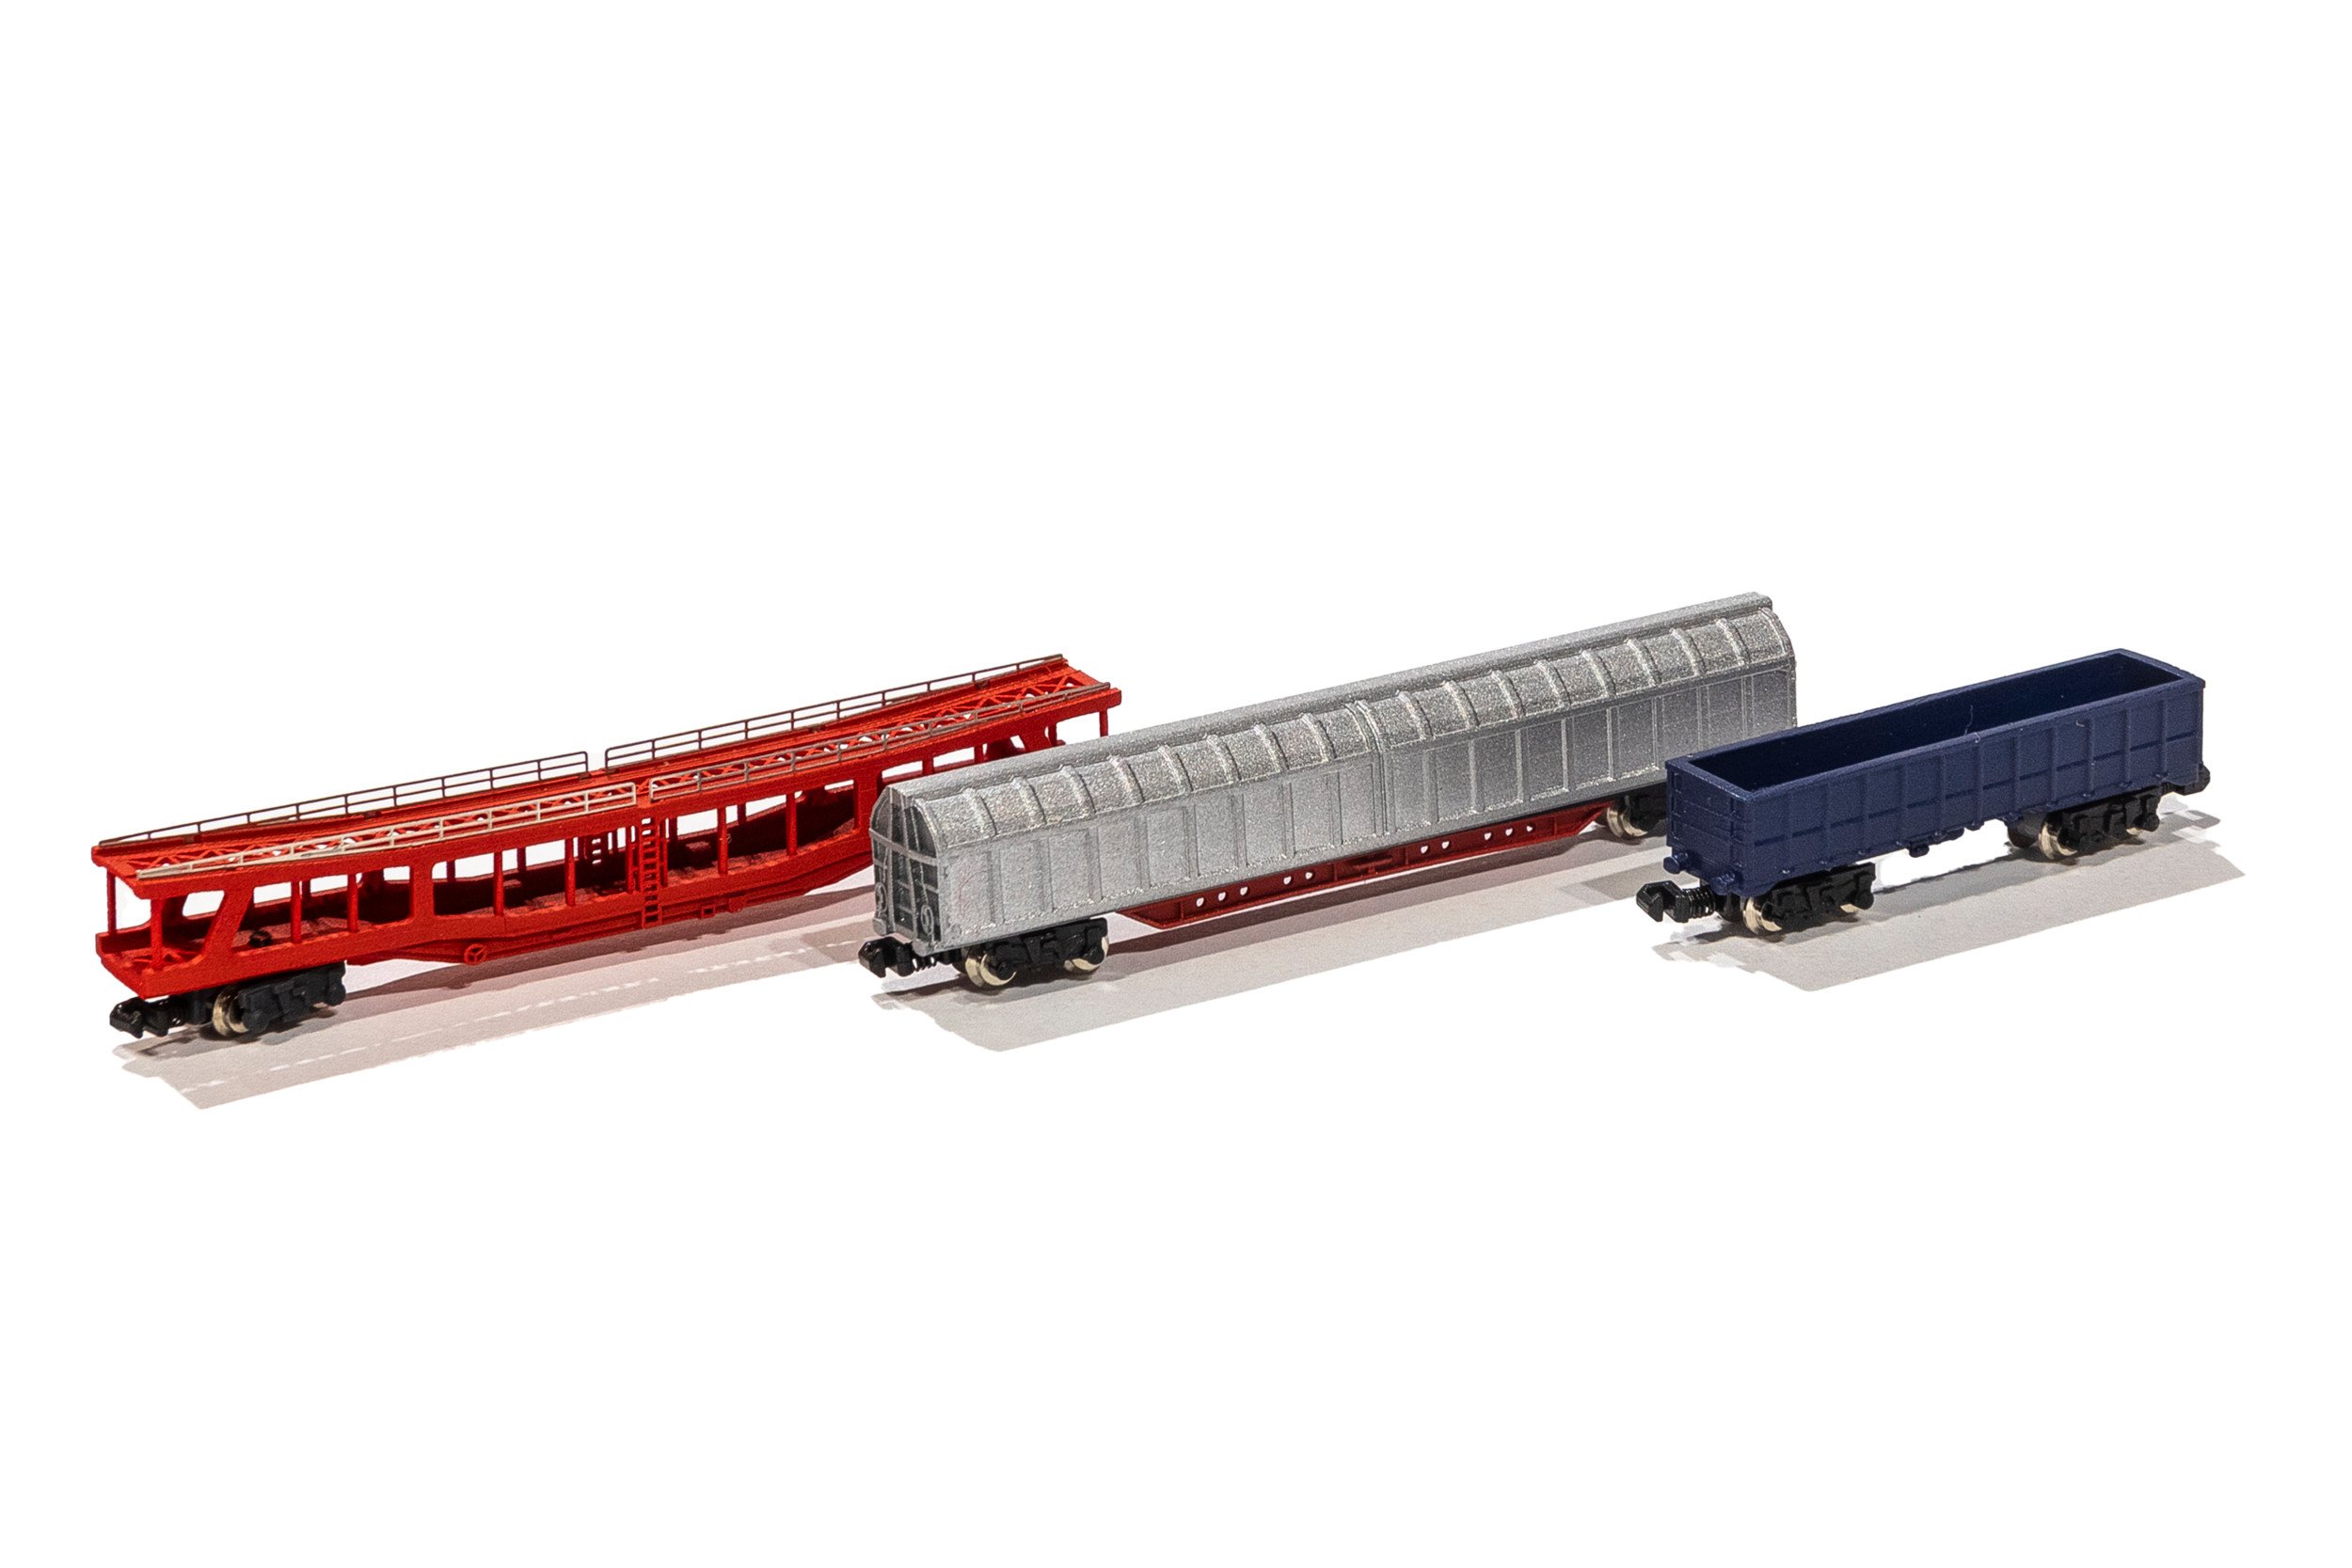 New T gauge items of rolling stock are also being developed.